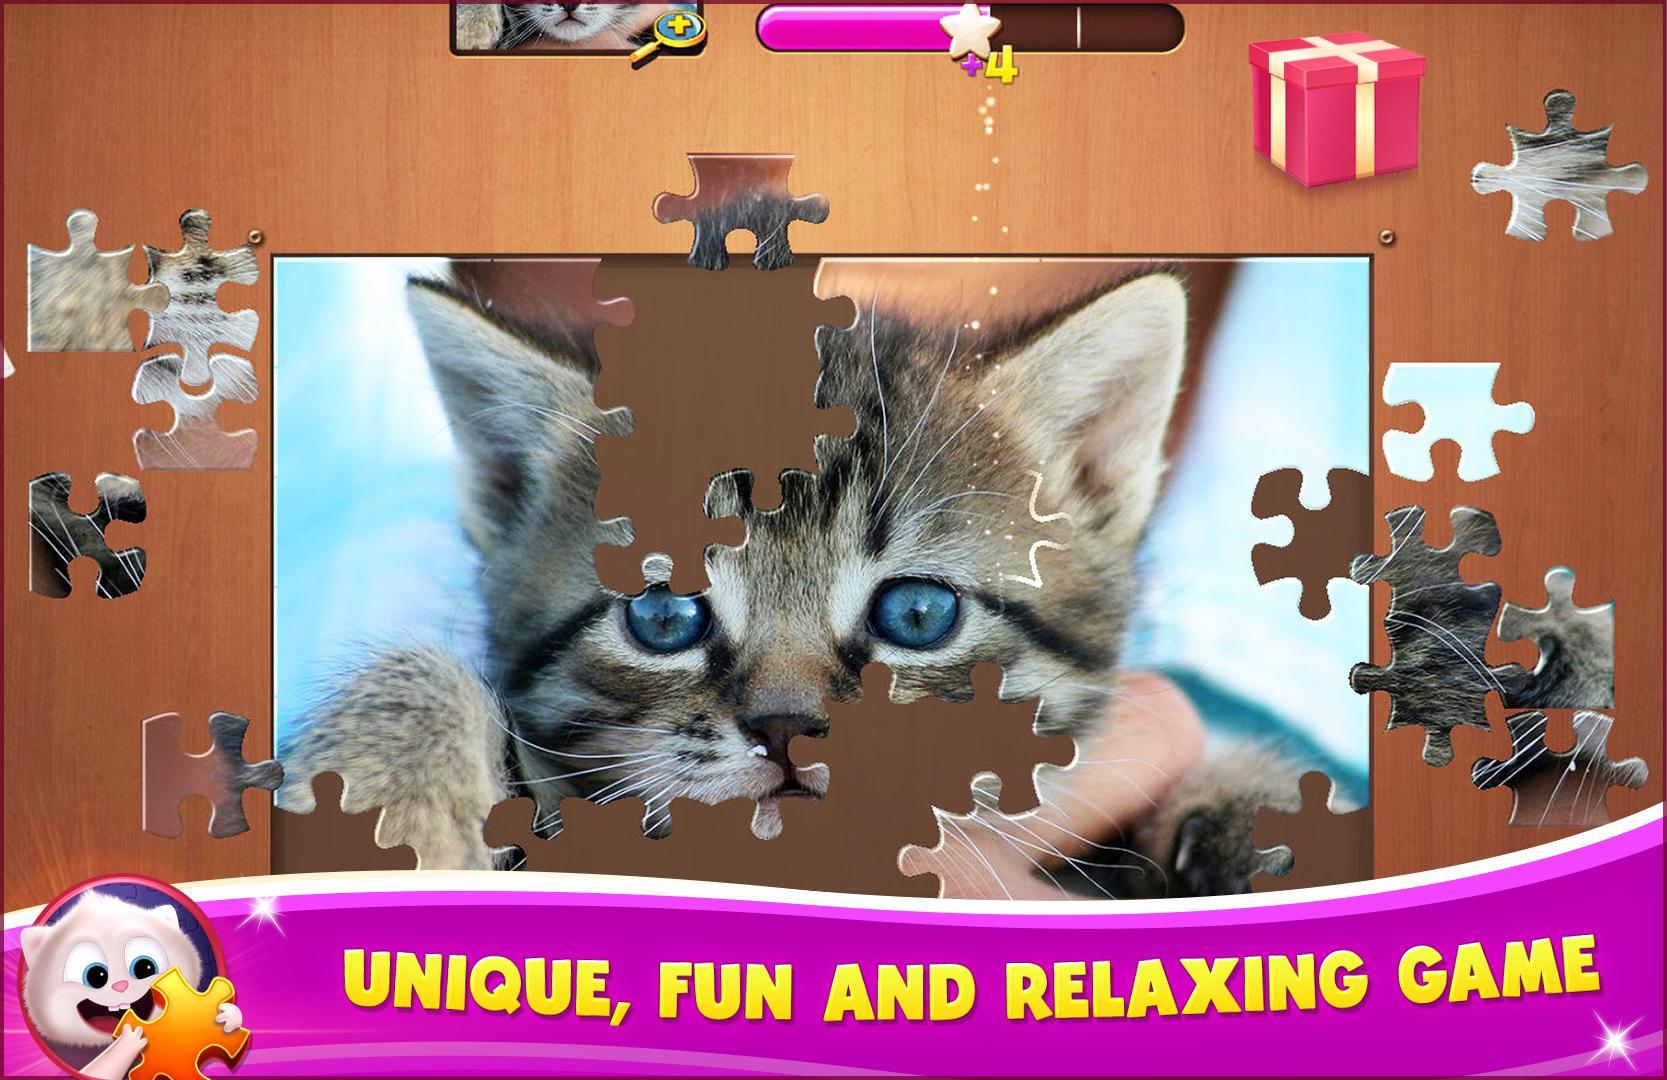 Jigsaw Puzzle Mania: Free and Epic Image Puzzles for Android - APK Download